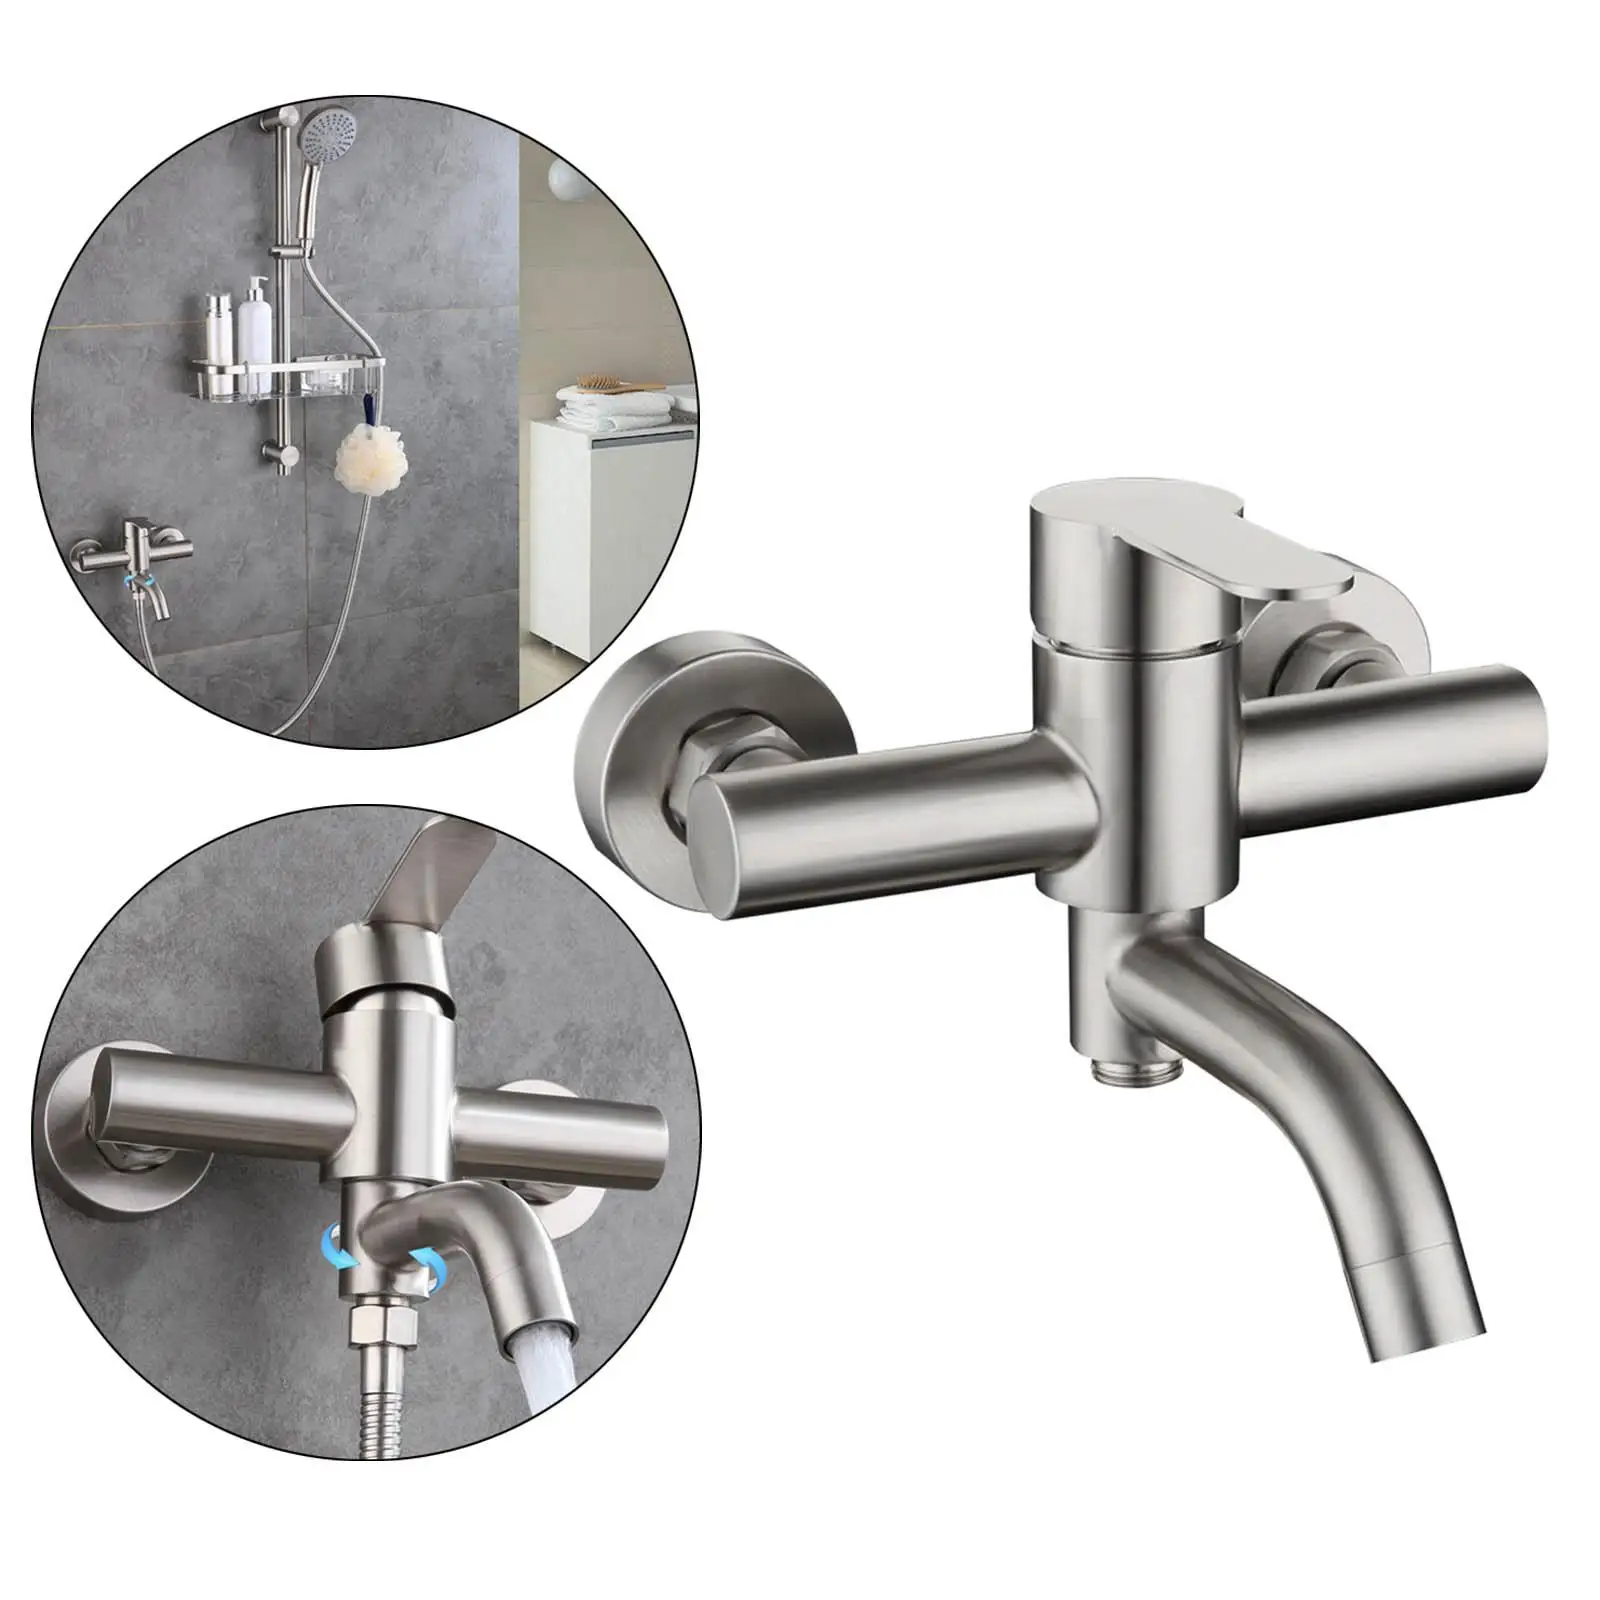 Stainless Steel Shower Mixer Faucet Bathroom System Shower Diverter Ceramic   Mounted Surface Brushed Bath Tub Mixing